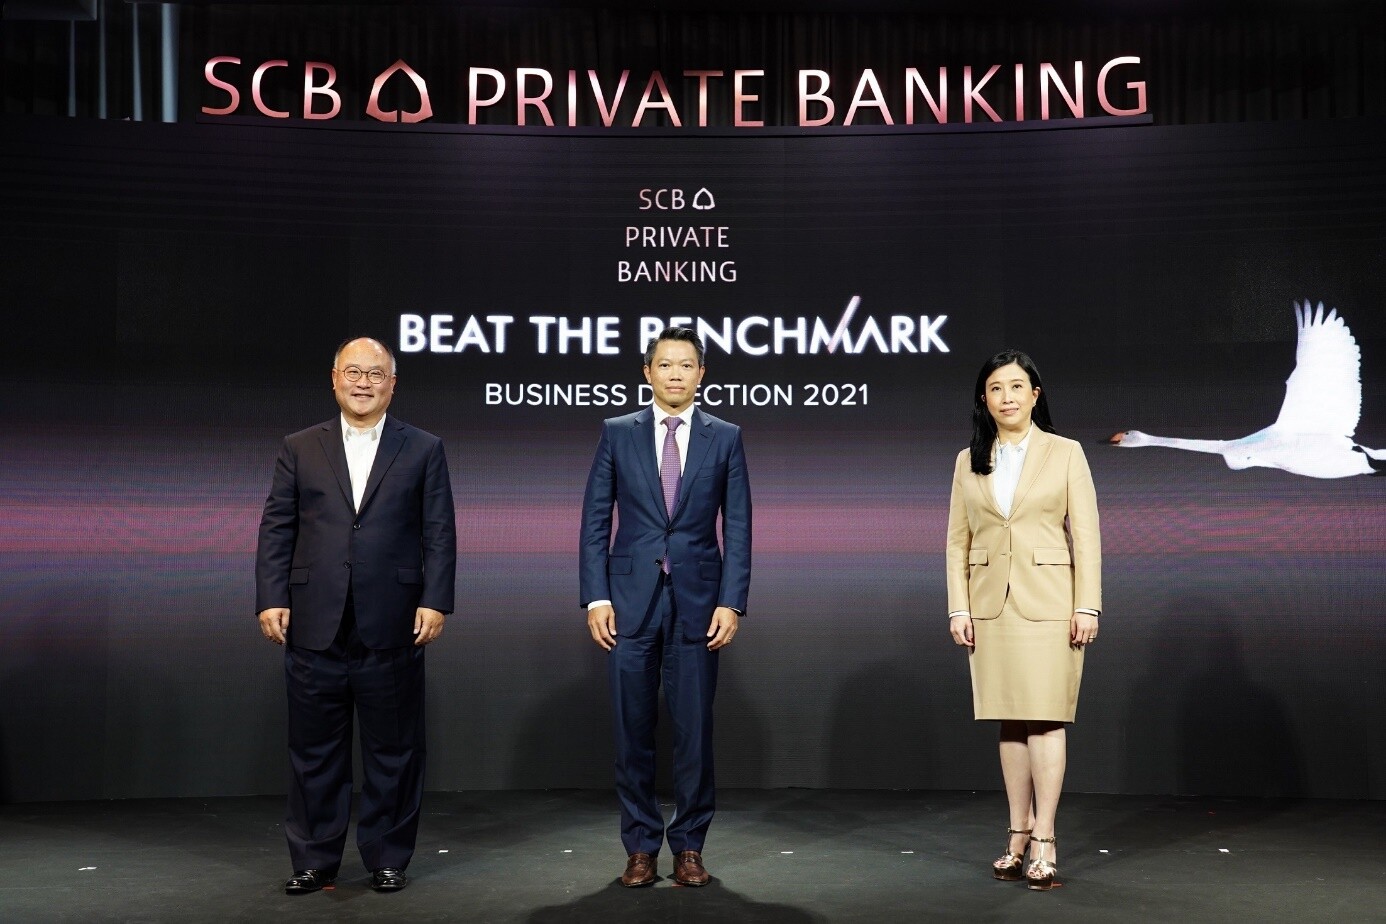 SCB PRIVATE BANKING on track to becoming Thailand's private banking leader, embracing three strategic thrusts and promoting "Beat the Benchmark" concept